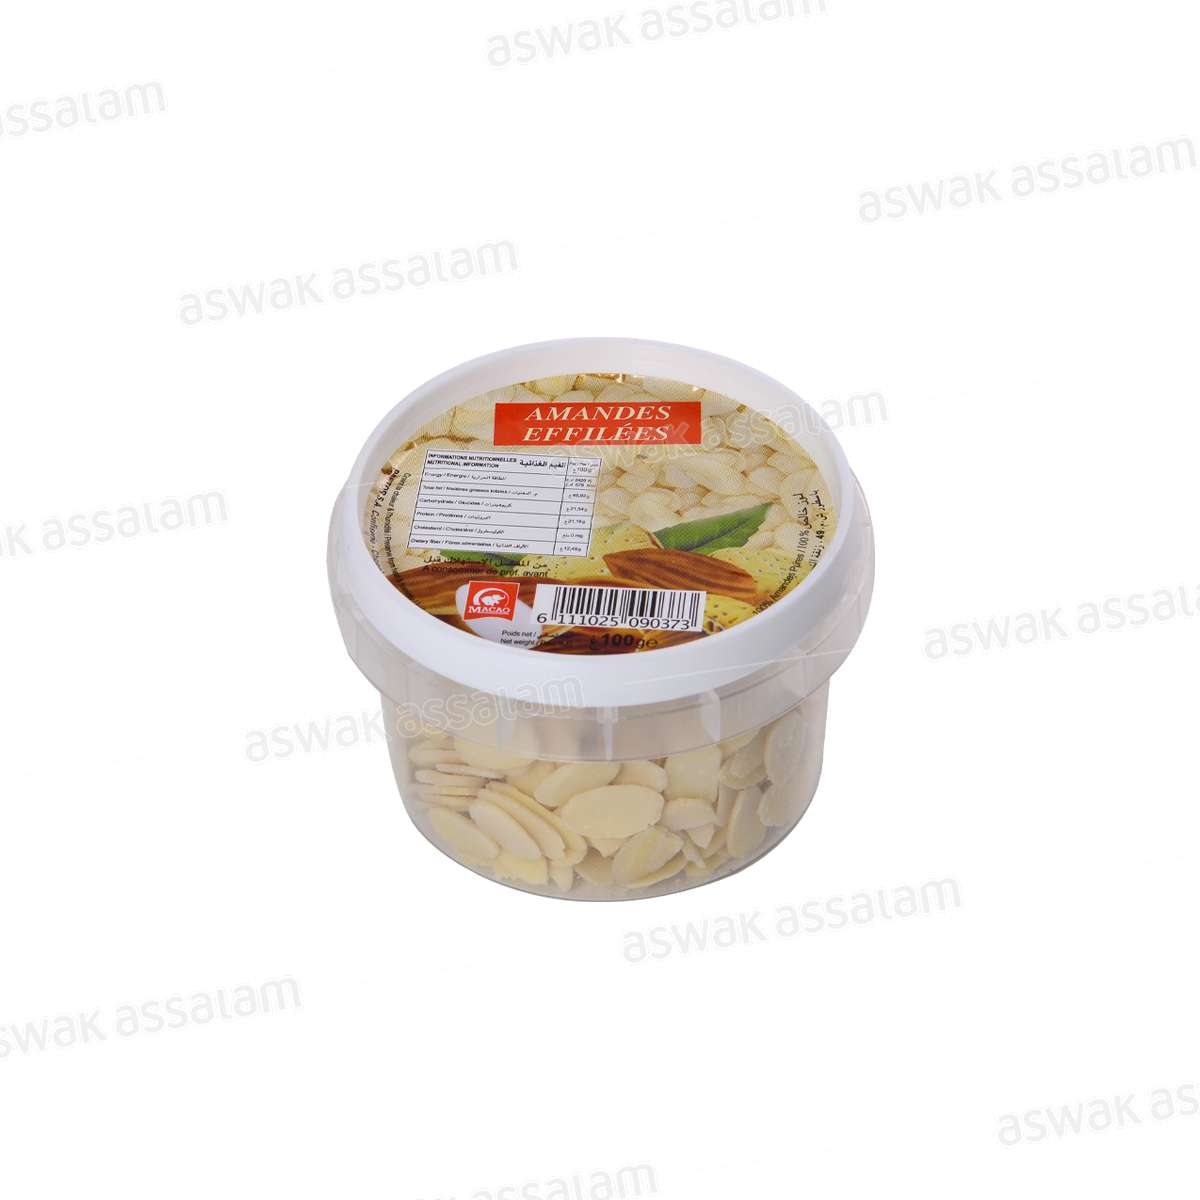 AMANDES EFFILEES 100G MACAO